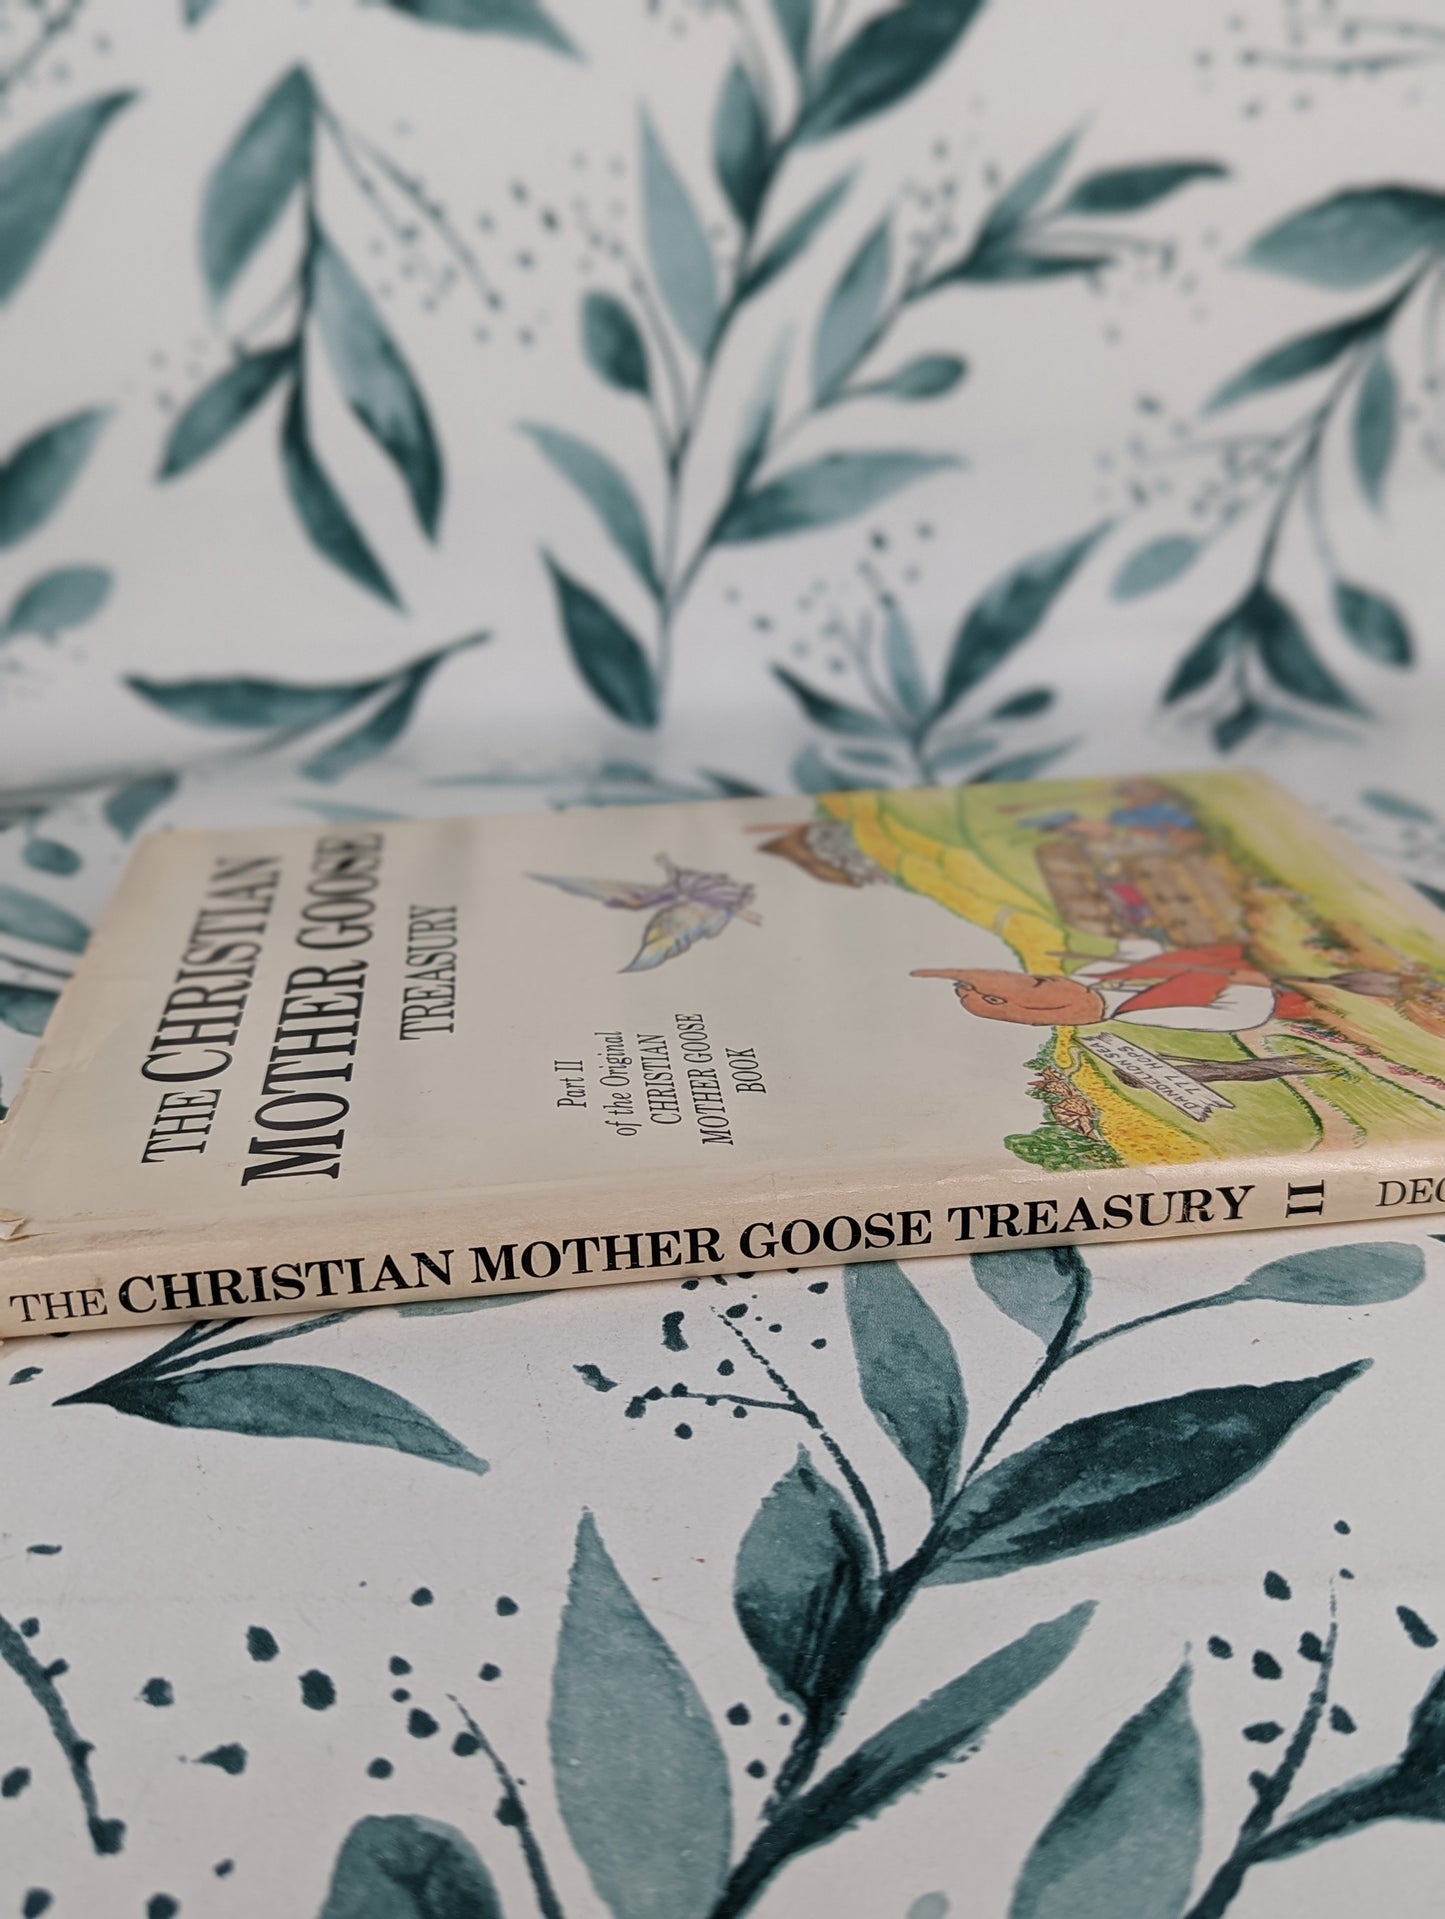 The Christian Mother Goose Treasury (Part II) - First edition, SIGNED BY AUTHOR